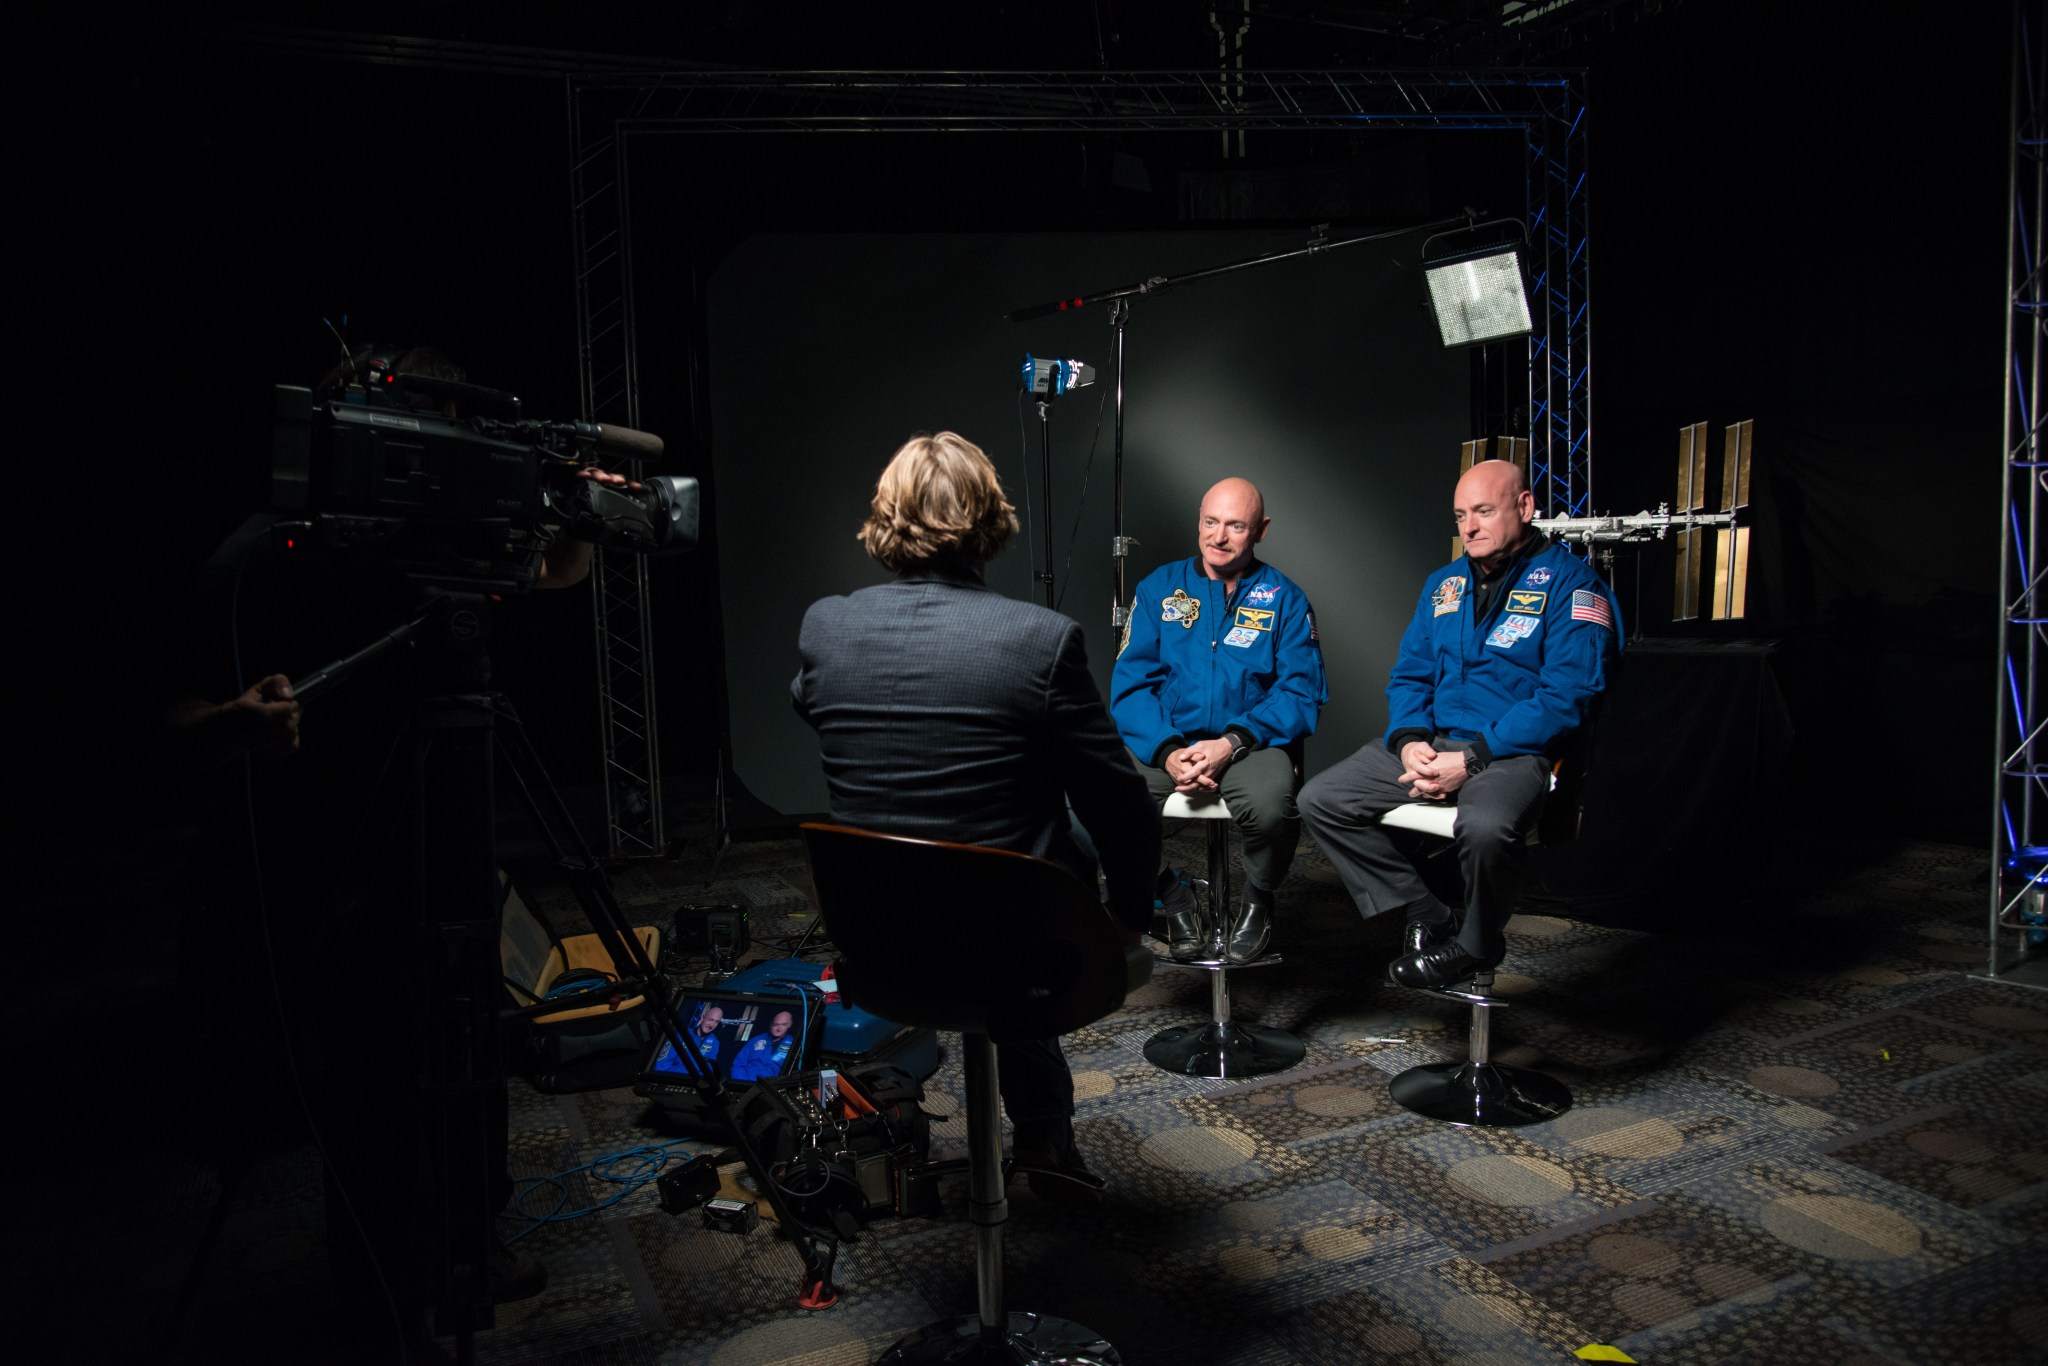 NASA astronauts Mark Kelly, left, and Scott Kelly discussed the One-Year Mission and Twins Study with CNN's Dr. Sanjay Gupta.